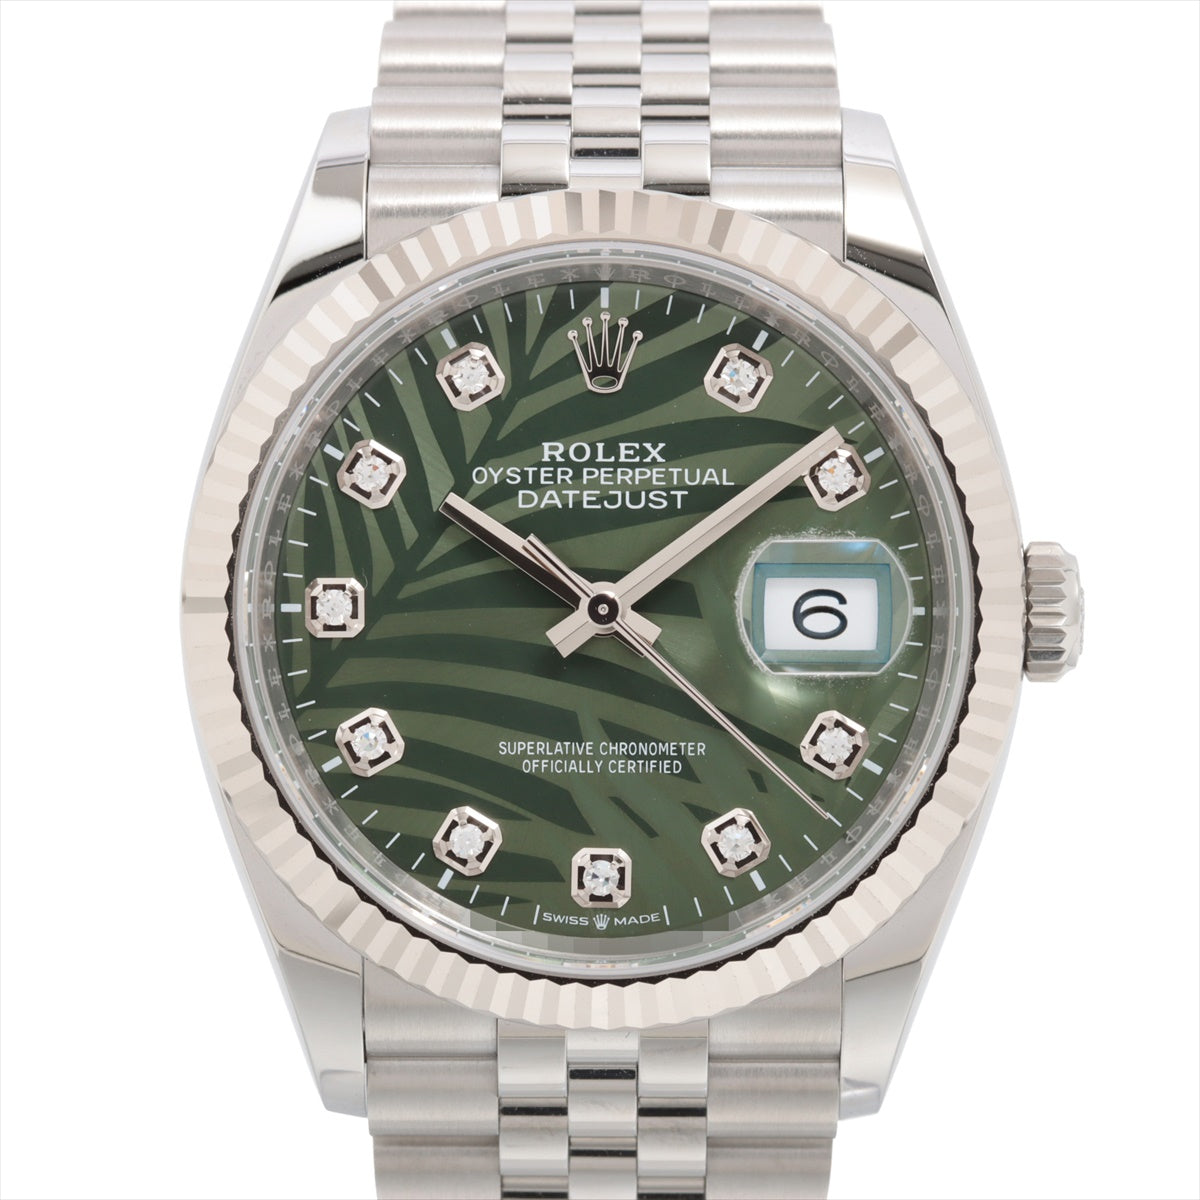 Rolex Datejust 126234G SS×WG AT Palm dial jubilee bracelet 3 Extra Links